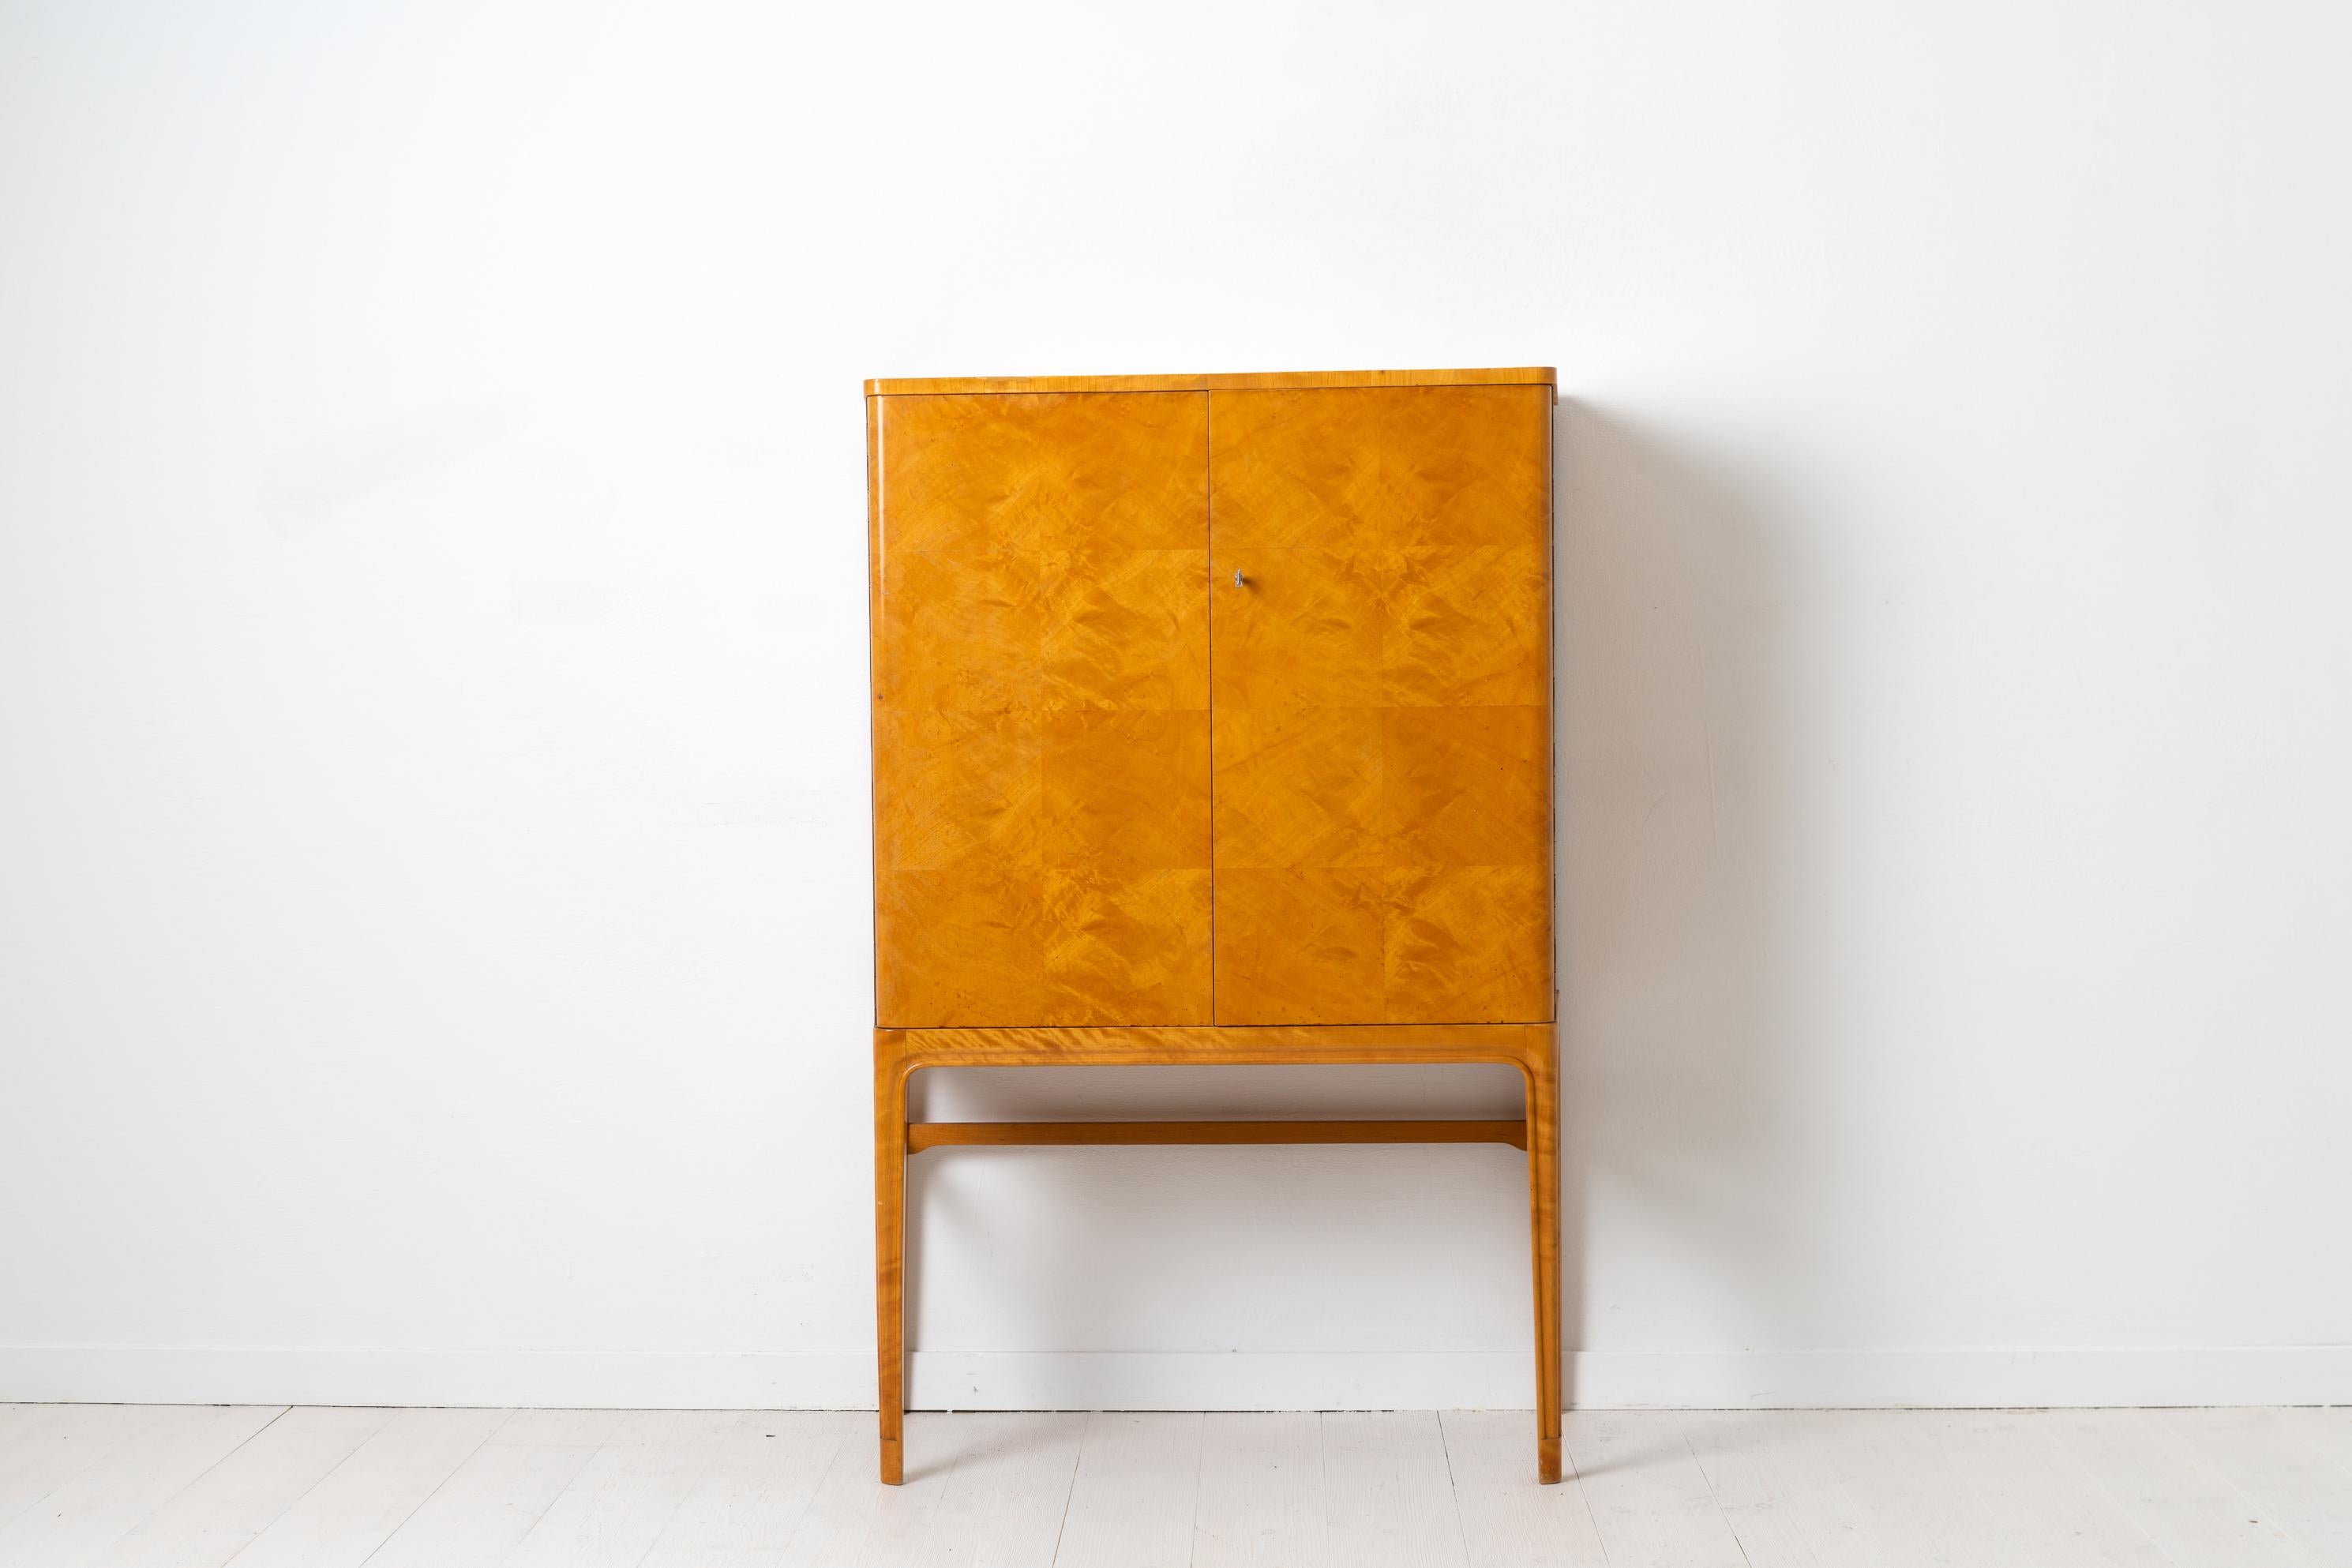 Swedish Art Deco cabinet with an exterior in veneered light birch and with an interior of mahogany. The interior has one shelf and 2 thin drawers with the rich mahogany color contrasting with the lighter exterior birch. The cabinet is vaguely